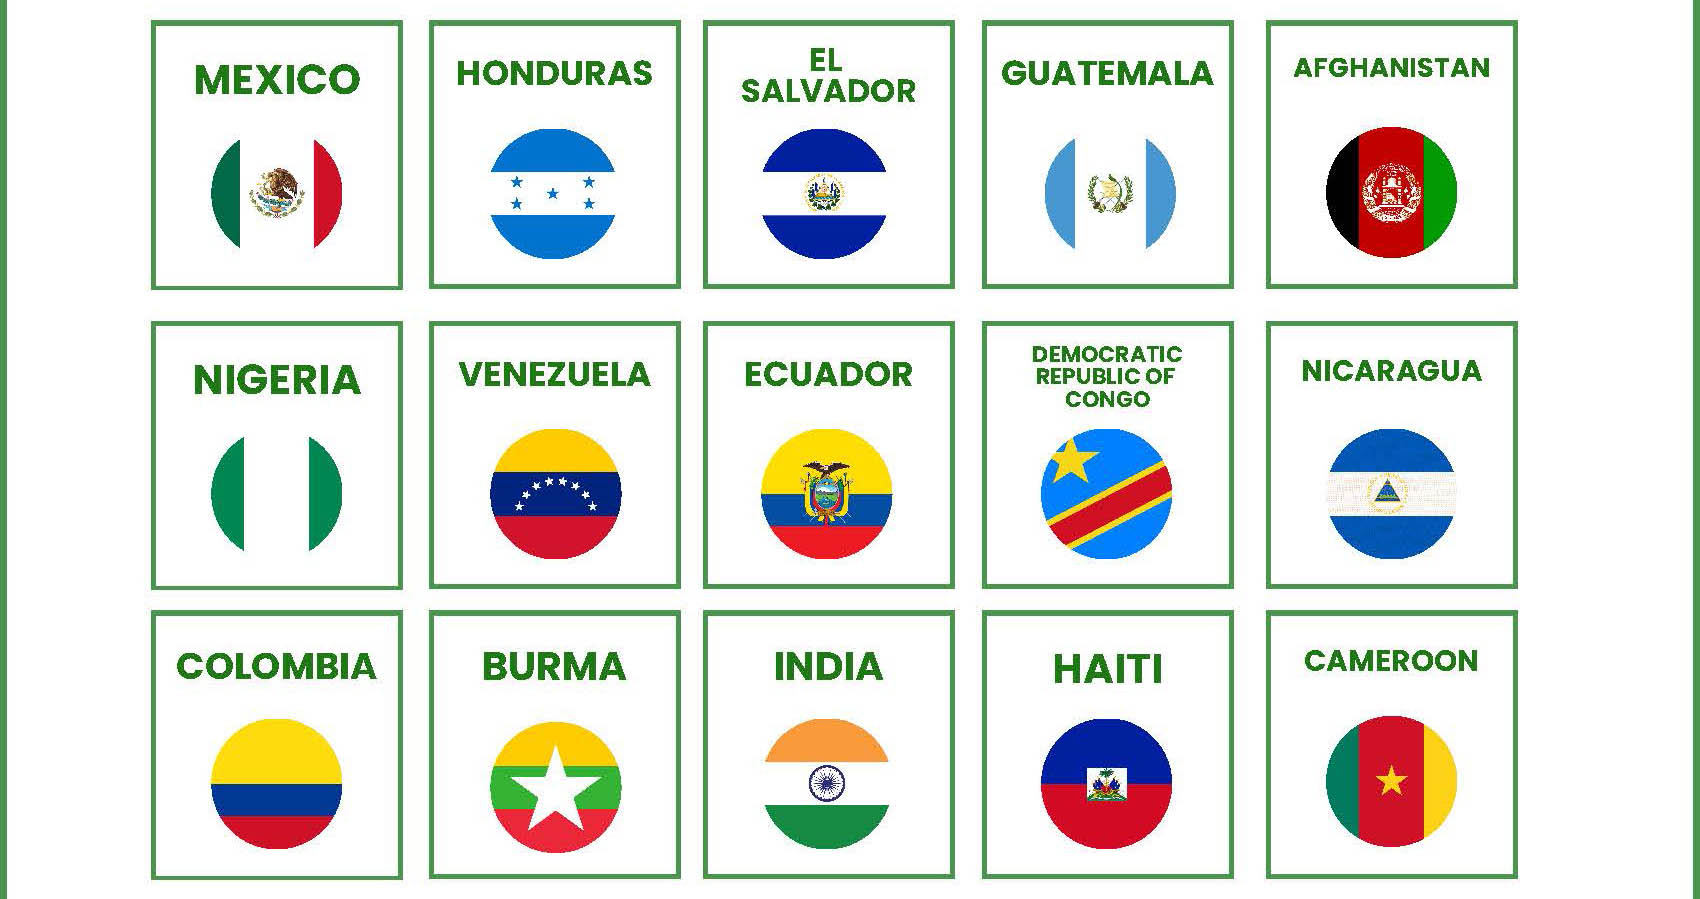 Graphic showing top 15 countries of origin of NIJC's clients. Each country's flag is in its own box outlined in green. The flags represent MEXICO, HONDURAS, EL SALVADOR, GUATEMALA, AFGHANISTAN, NIGERIA, VENEZUELA, ECUADOR, DEMOCRATIC REPUBLIC OF CONGO, NICARAGUA, COLOMBIA, BURMA, INDIA, HAITI, and CAMEROON